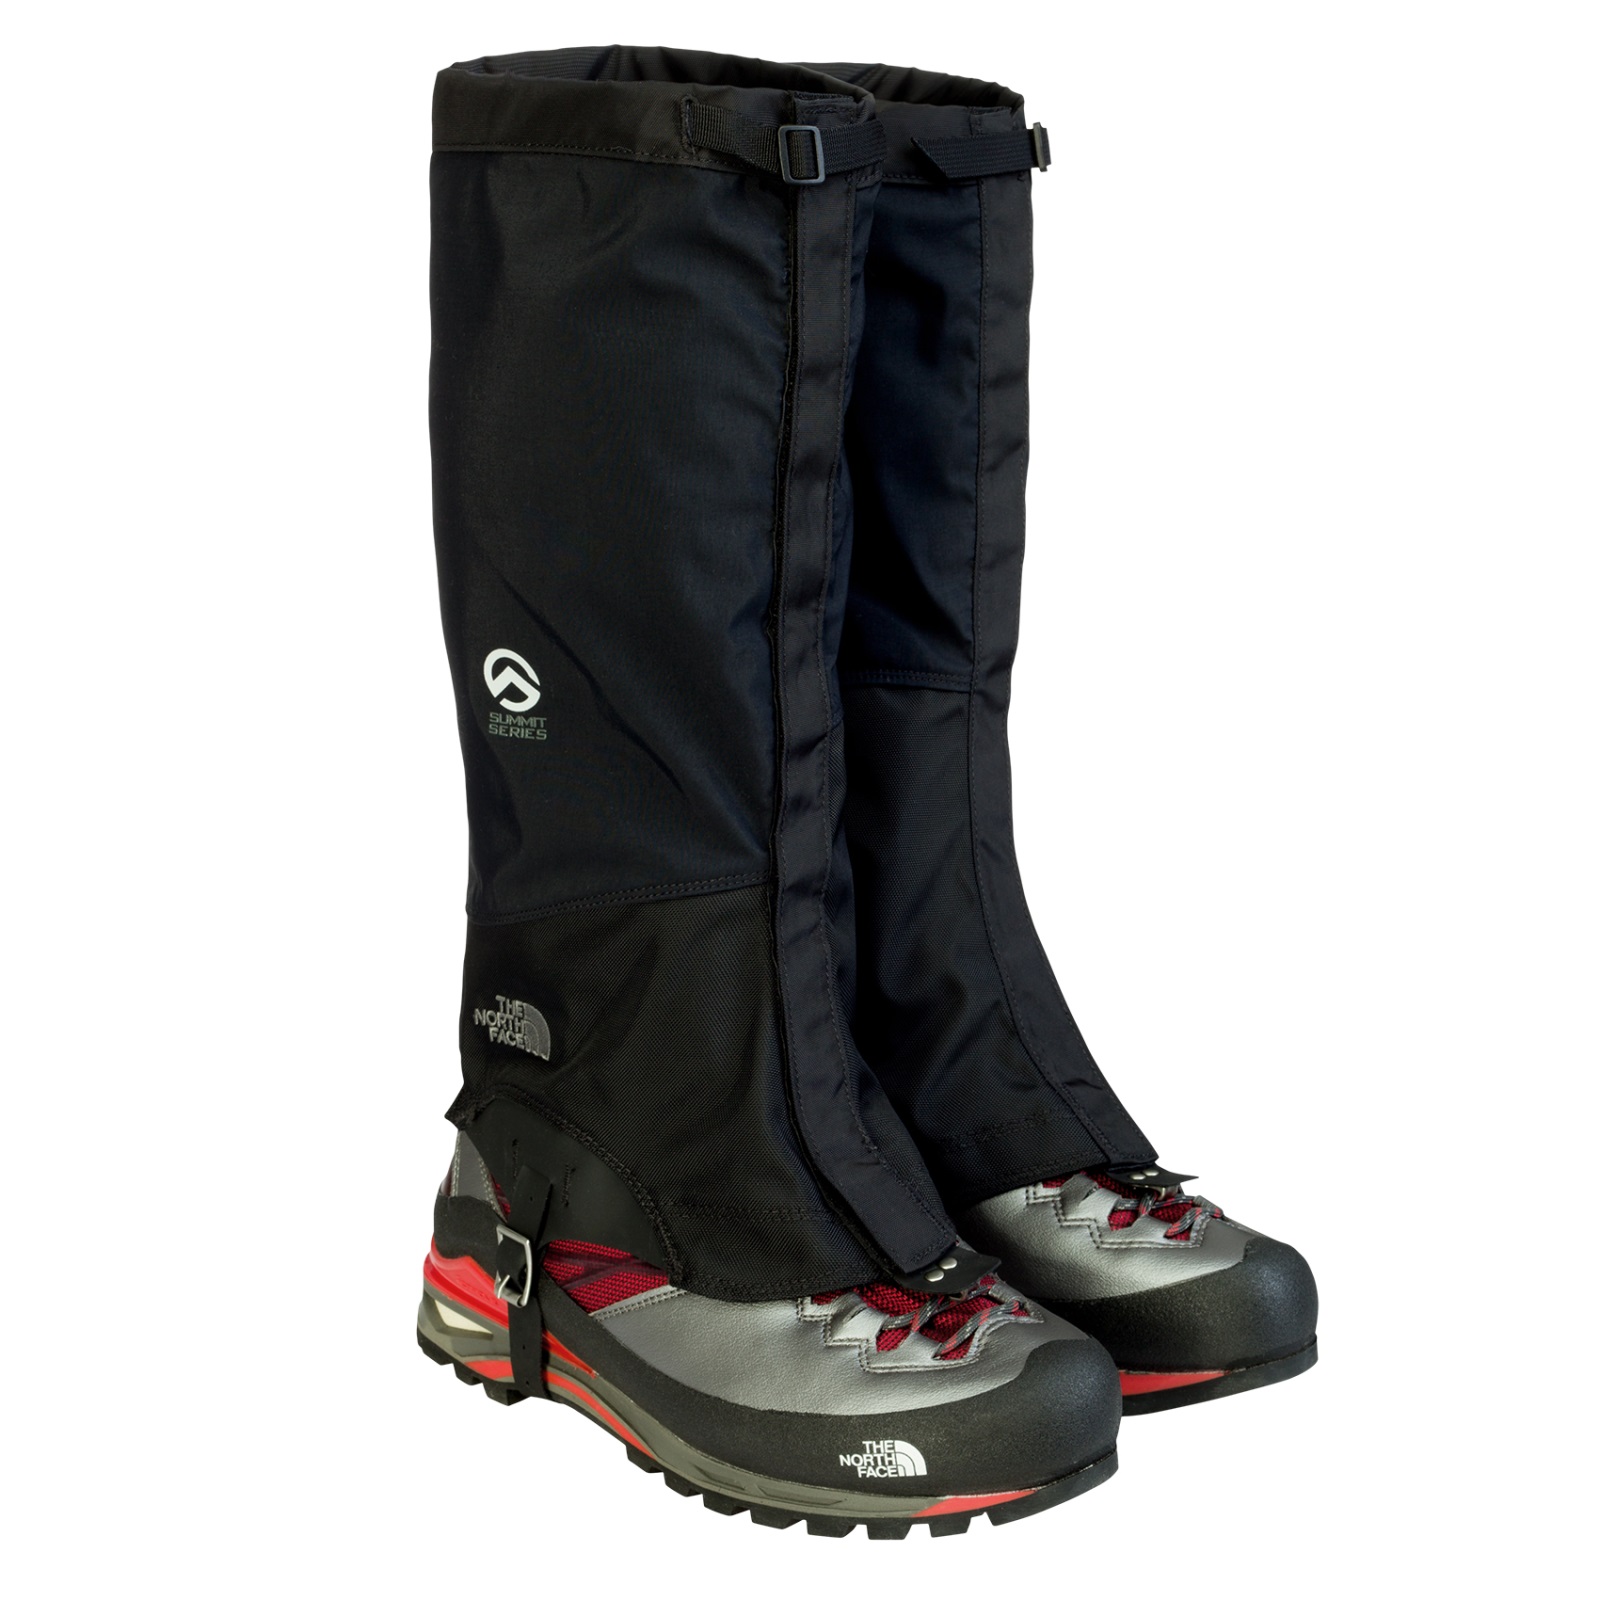 Buy The North Face Gore-Tex Gaiter from Outnorth